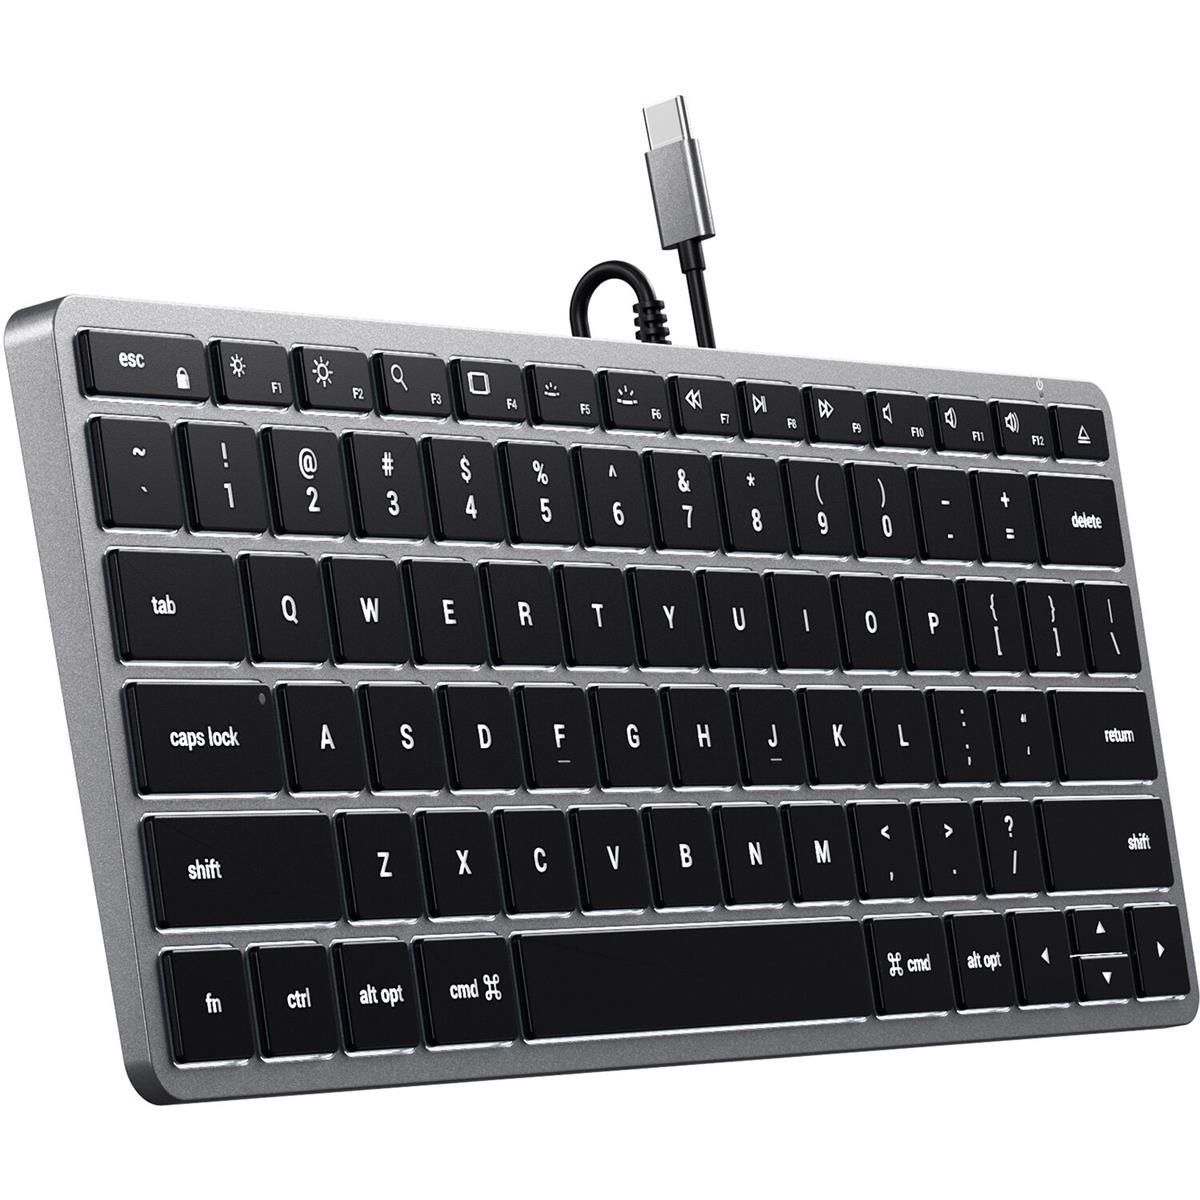 Image of Satechi Slim W1 USB-C Compact Wired Backlit Keyboard